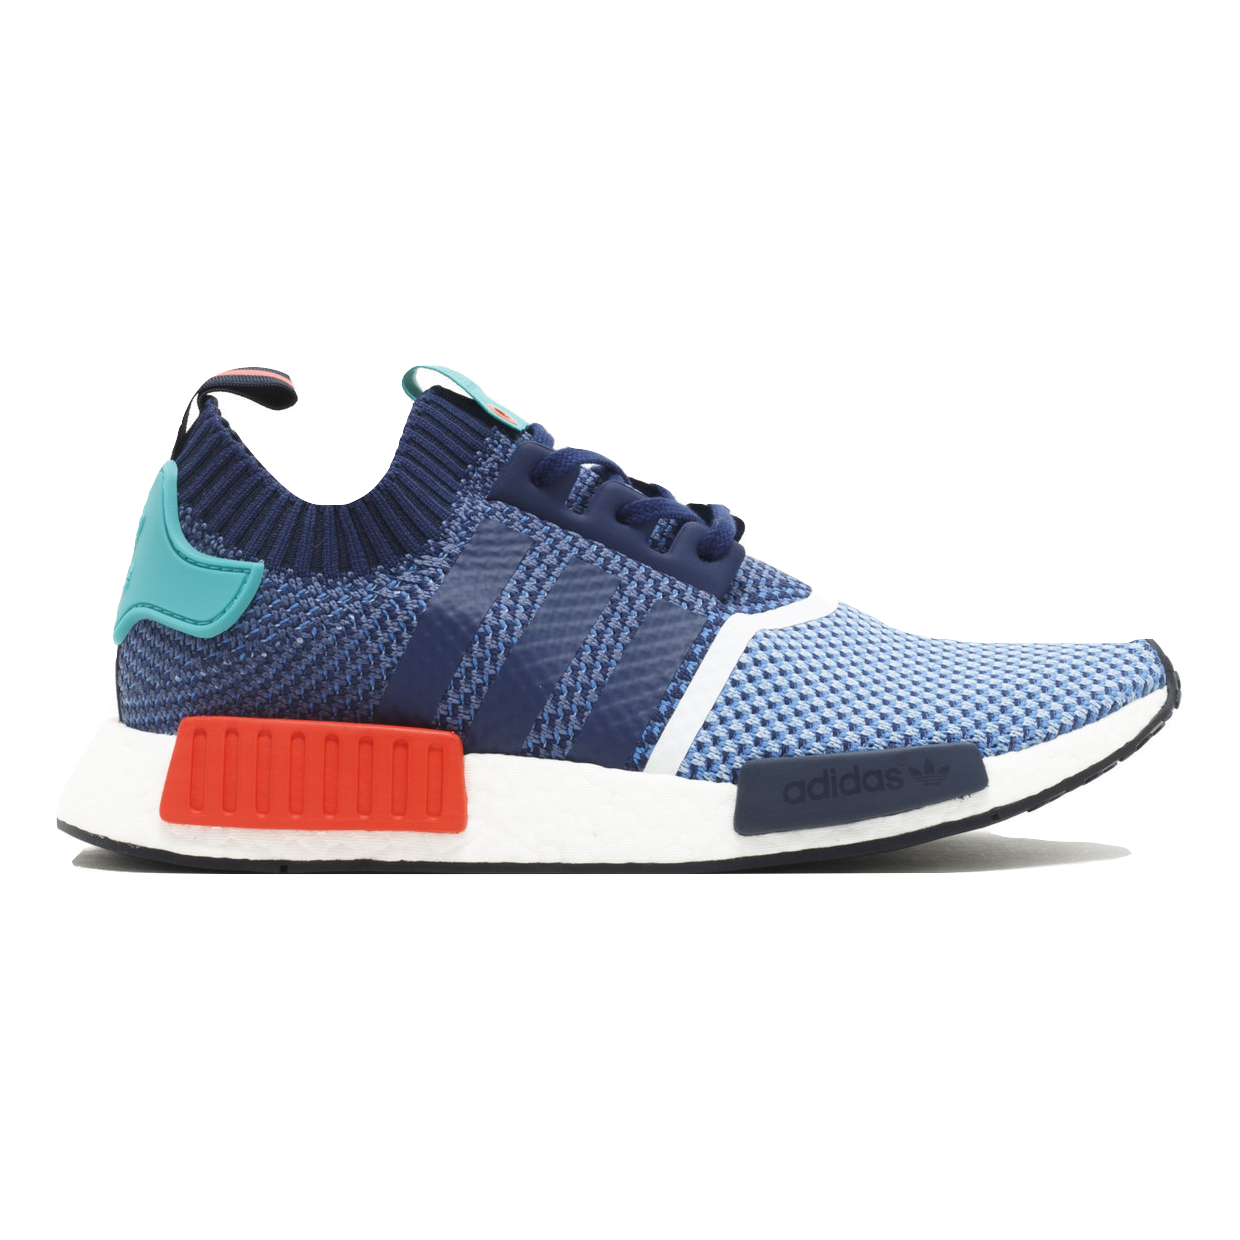 NMD R1 PK Packers